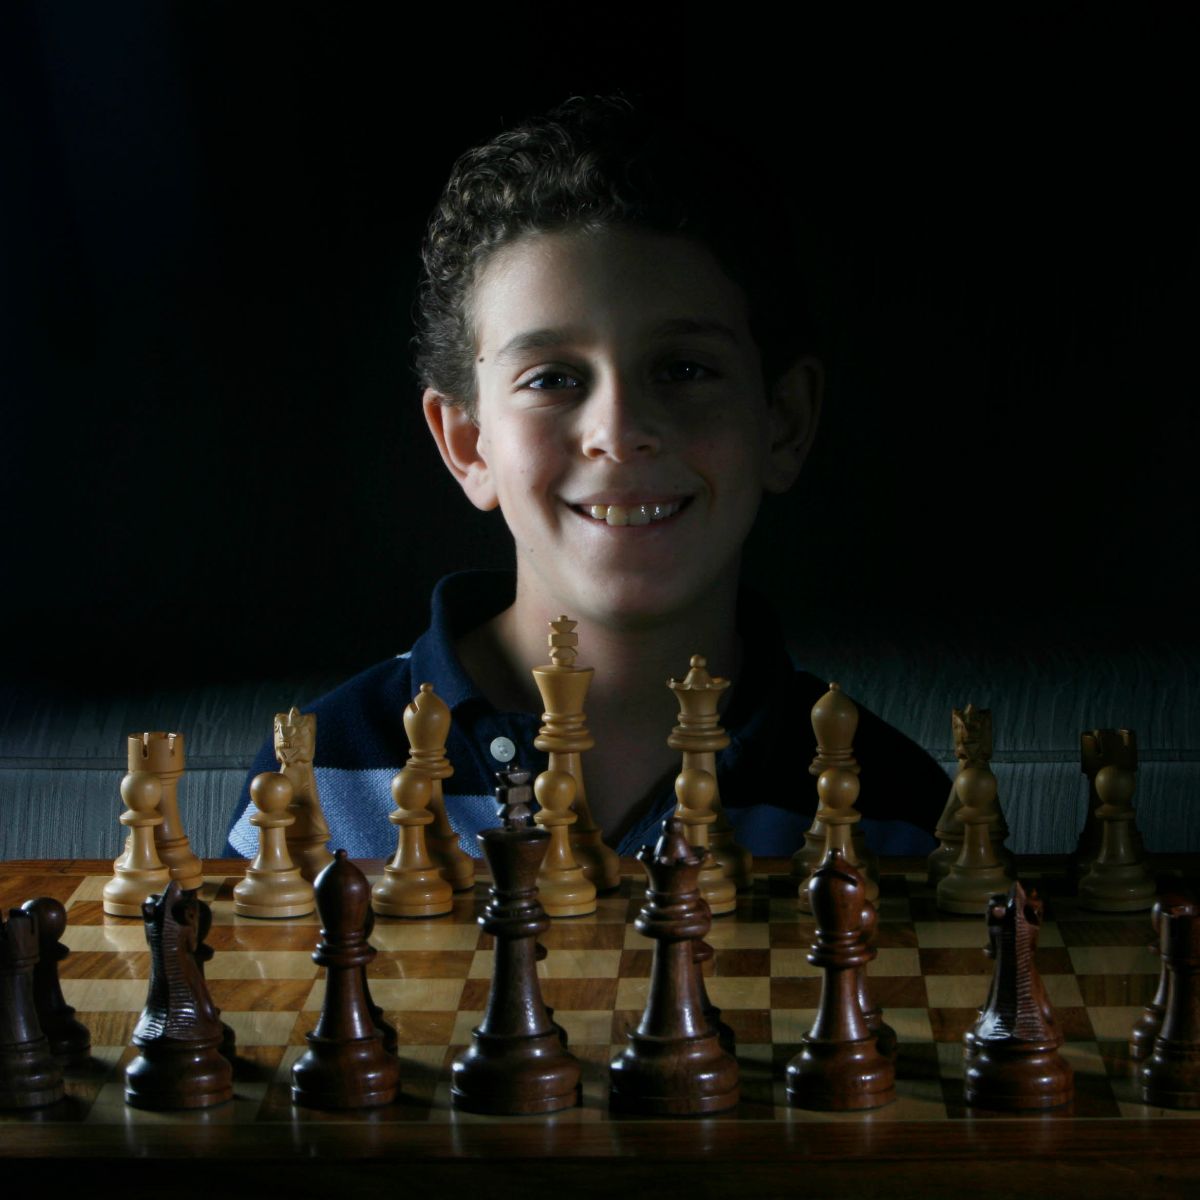 Why is Daniel Naroditsky's Chess.com rating so high compared to his FIDE  rating of 2600? - Quora